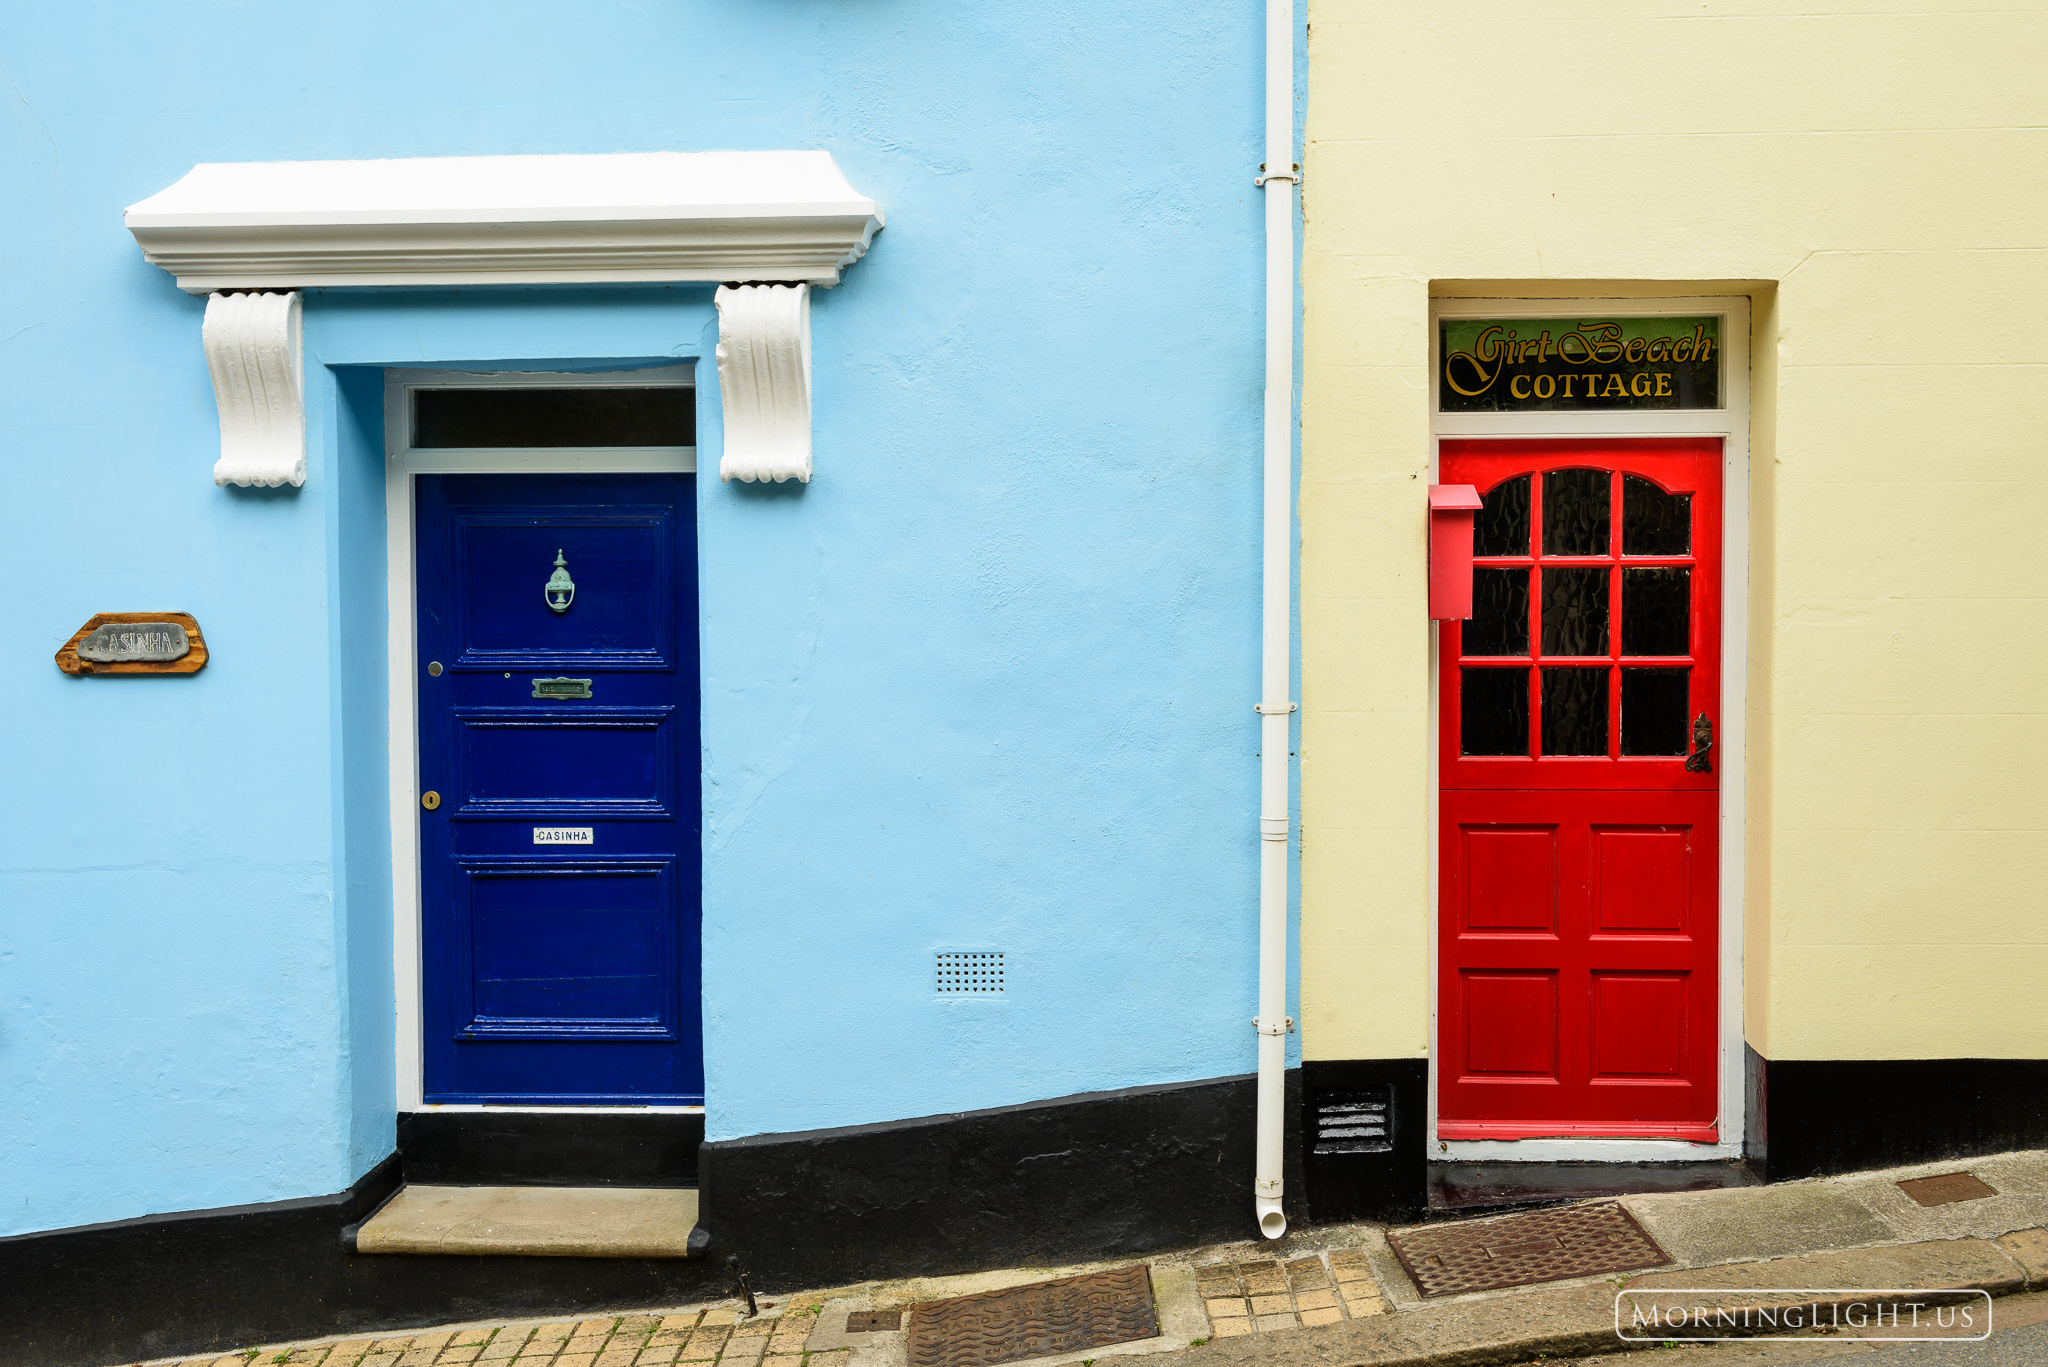 Two of the many colorful doors to be found in Kingsand, Cornwall, United Kingdom.